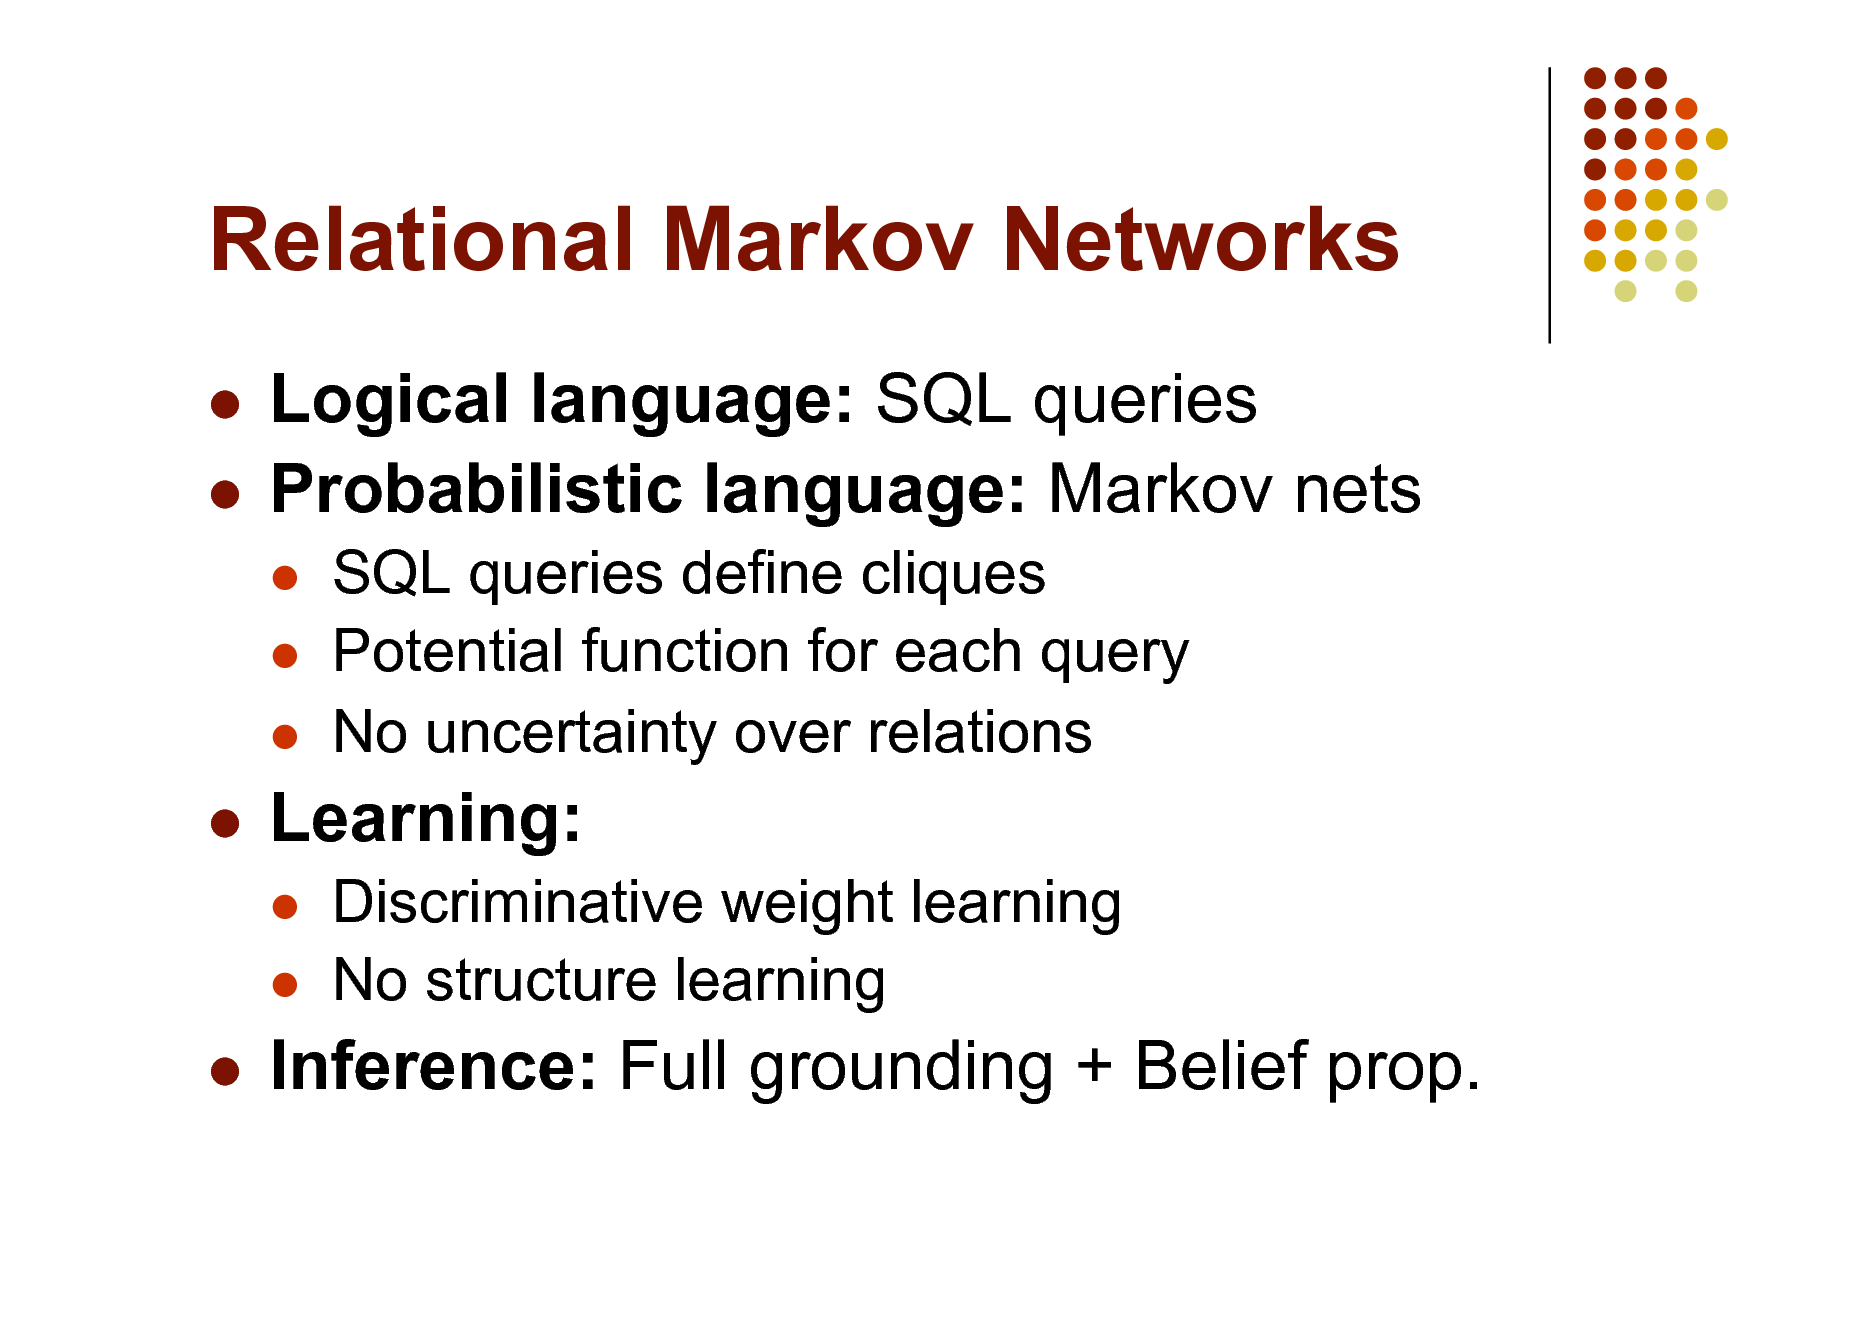 Slide: Relational Markov Networks
Logical language: SQL queries  Probabilistic language: Markov nets

  

SQL queries define cliques Potential function for each query No uncertainty over relations Discriminative weight learning No structure learning



Learning:
 



Inference: Full grounding + Belief prop.

